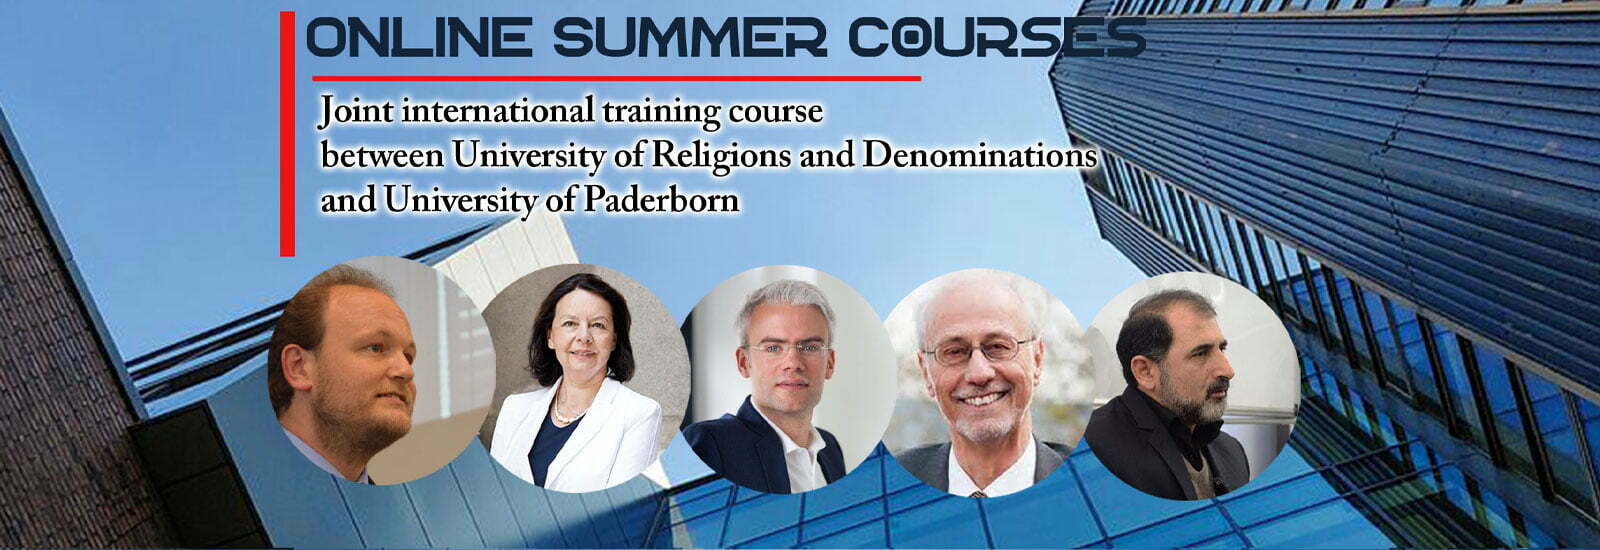 The online Summer School of Religions, is an opportunity for those interested in theology to get acquainted with theological and religious issues and the views of scholars by attending intensive workshops in a short time.